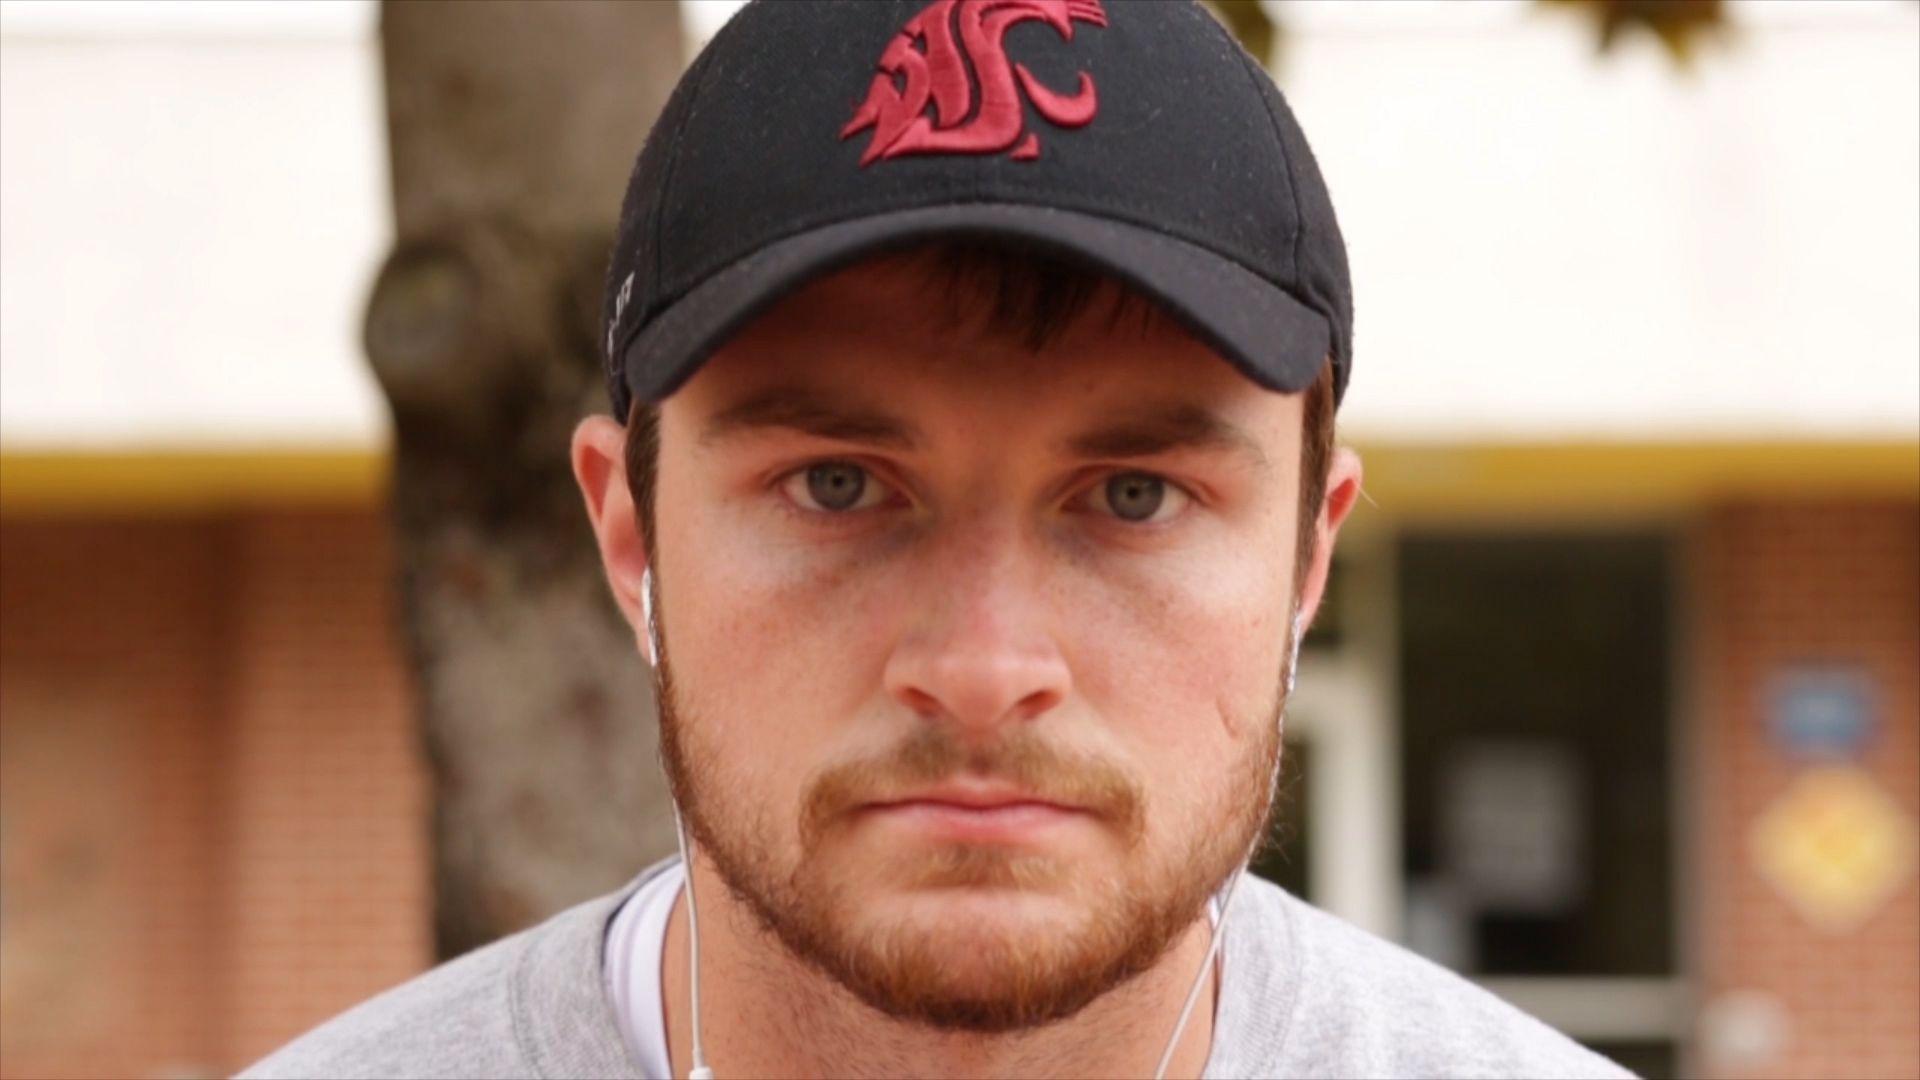 Washington State's Luke Falk reflects on being a former walk on to